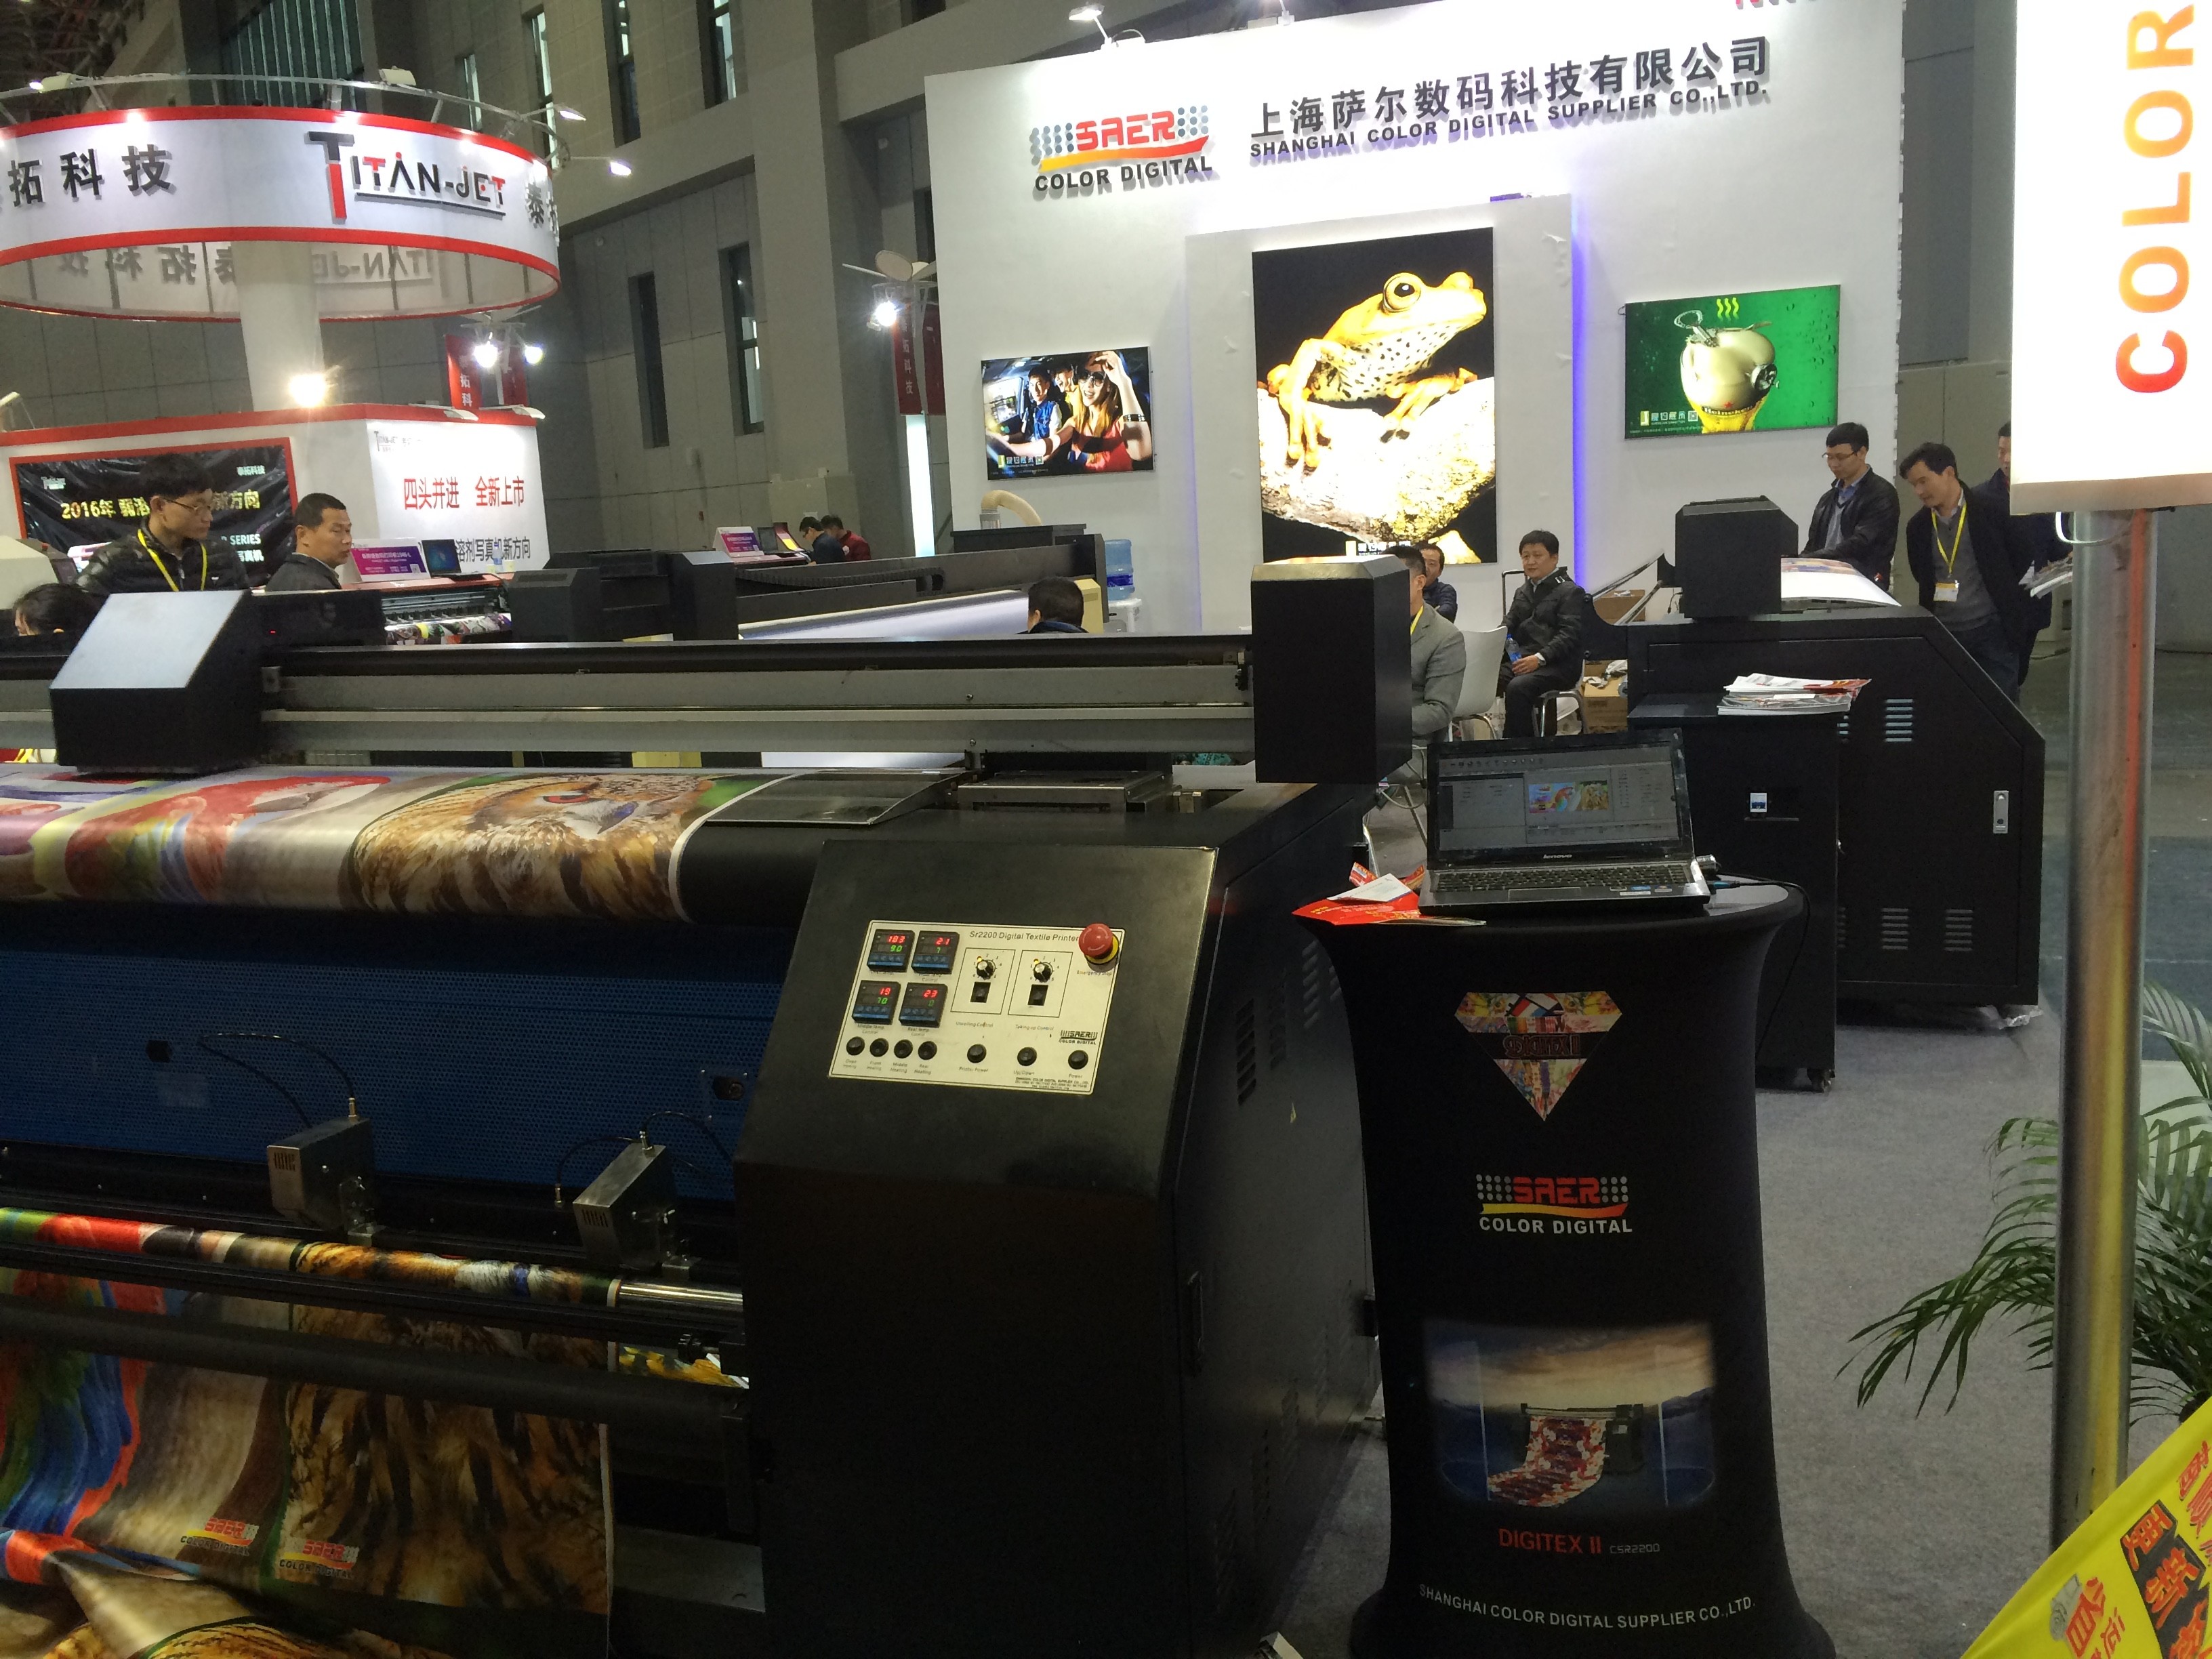 China Roll To Roll Directly Print Cotton Fabric Material Printer With Pigment Ink on sale